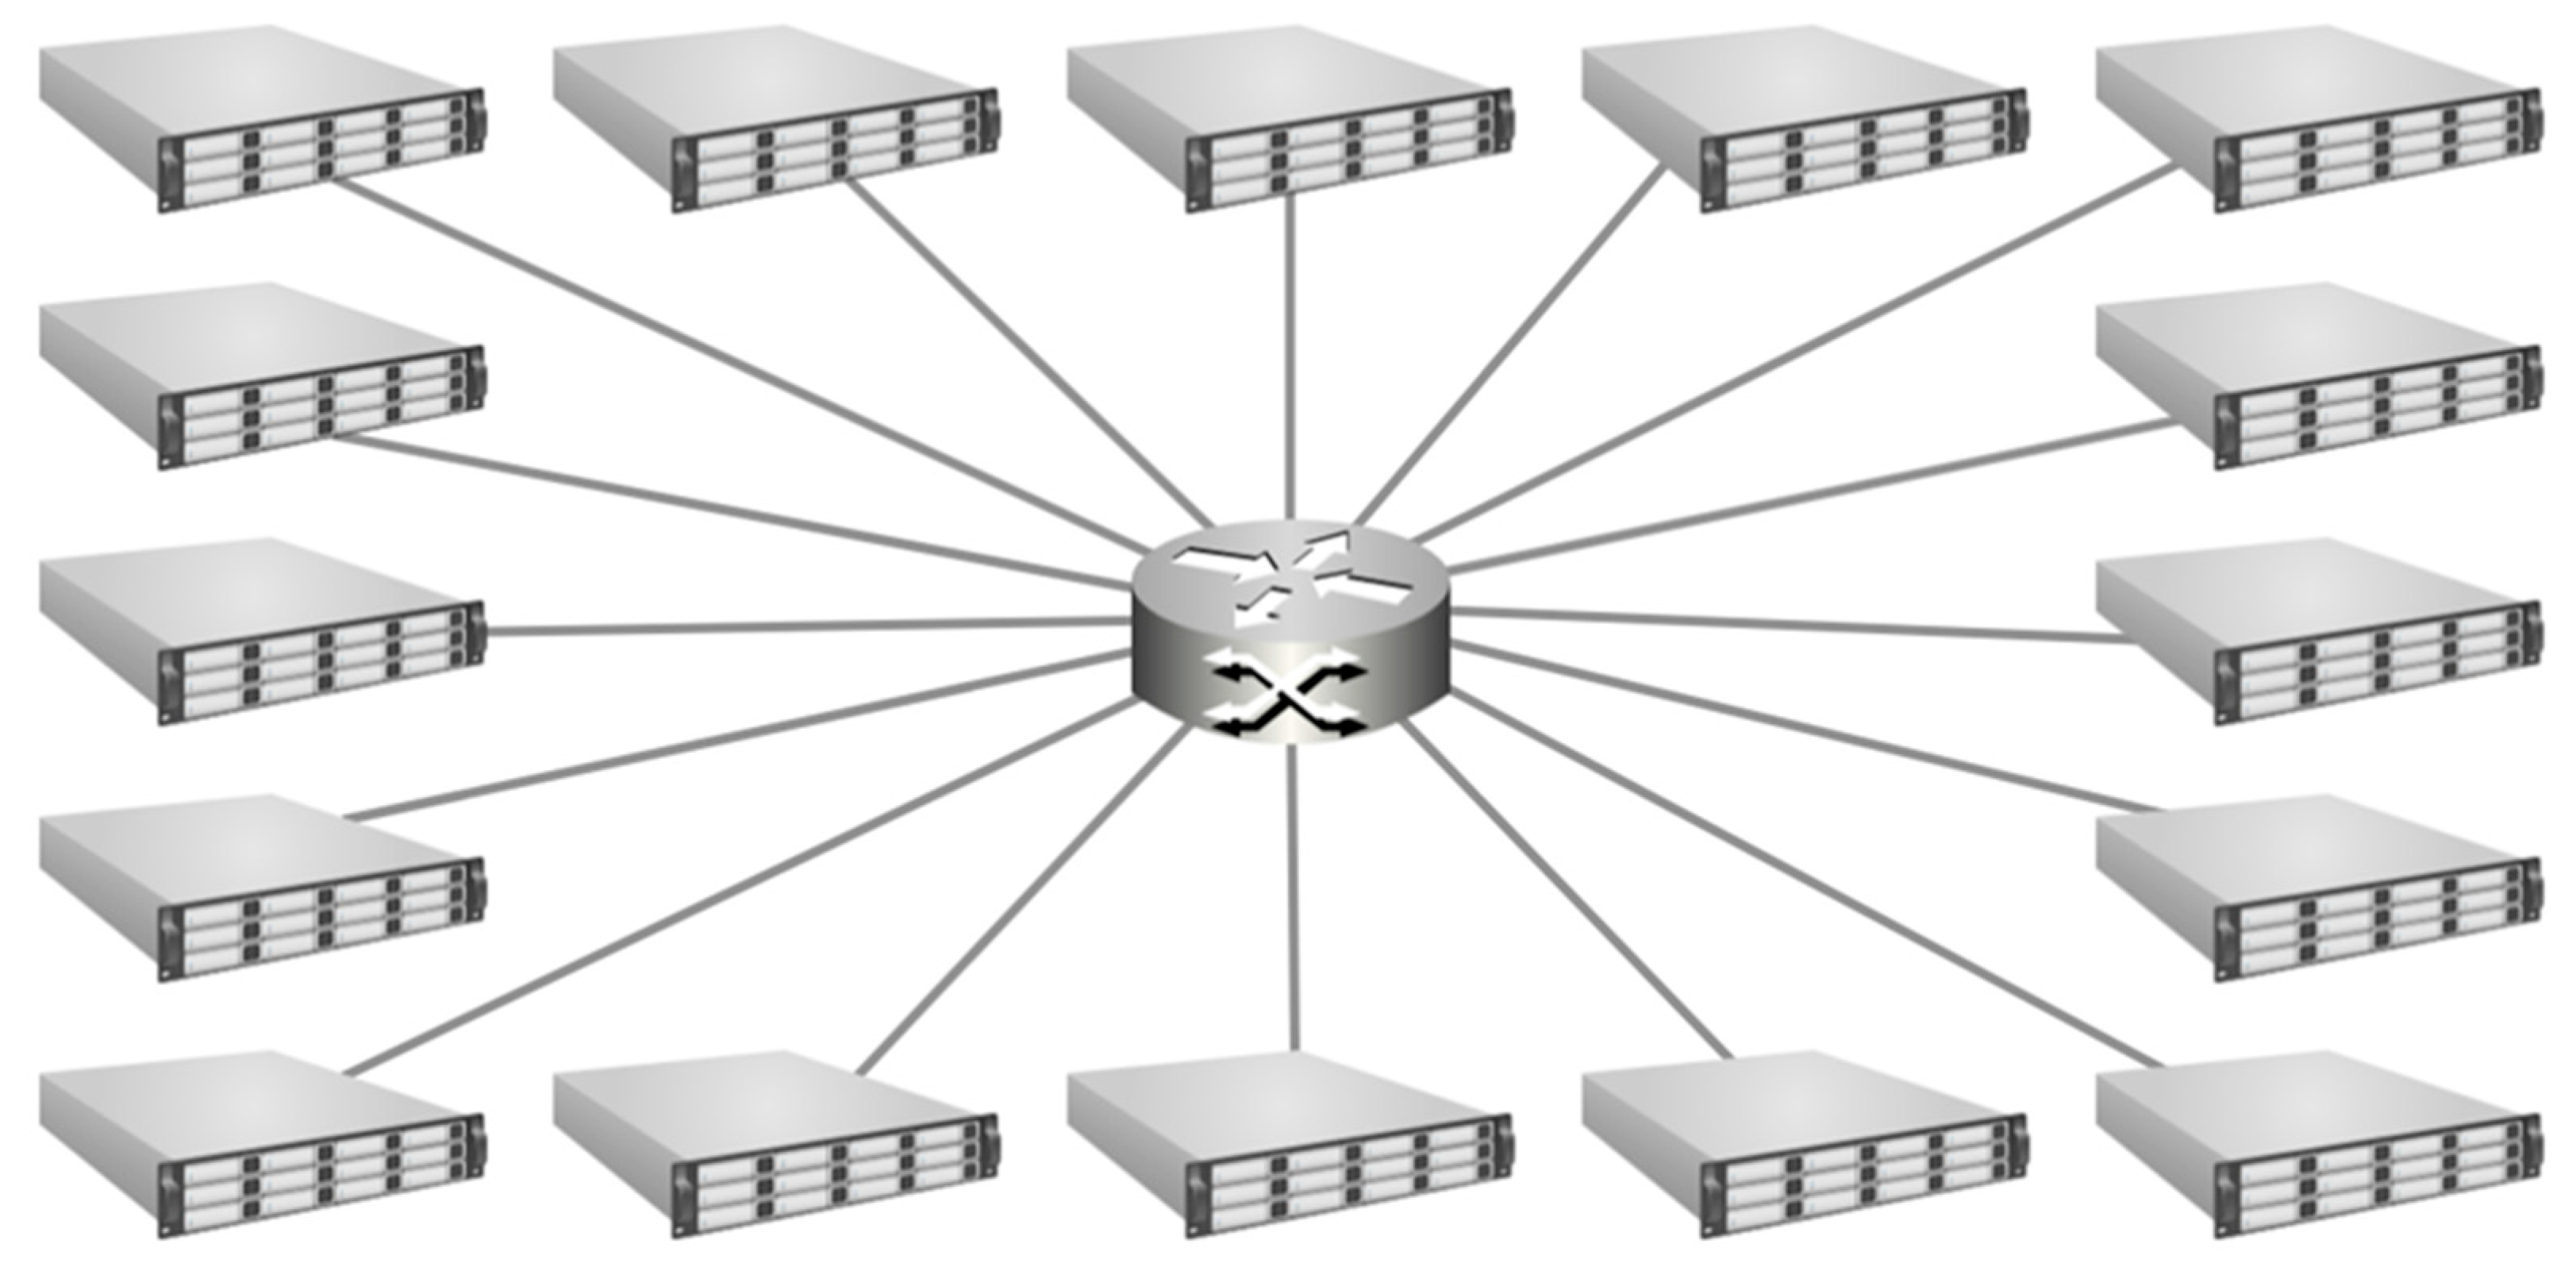 What is Network Topology in Hindi